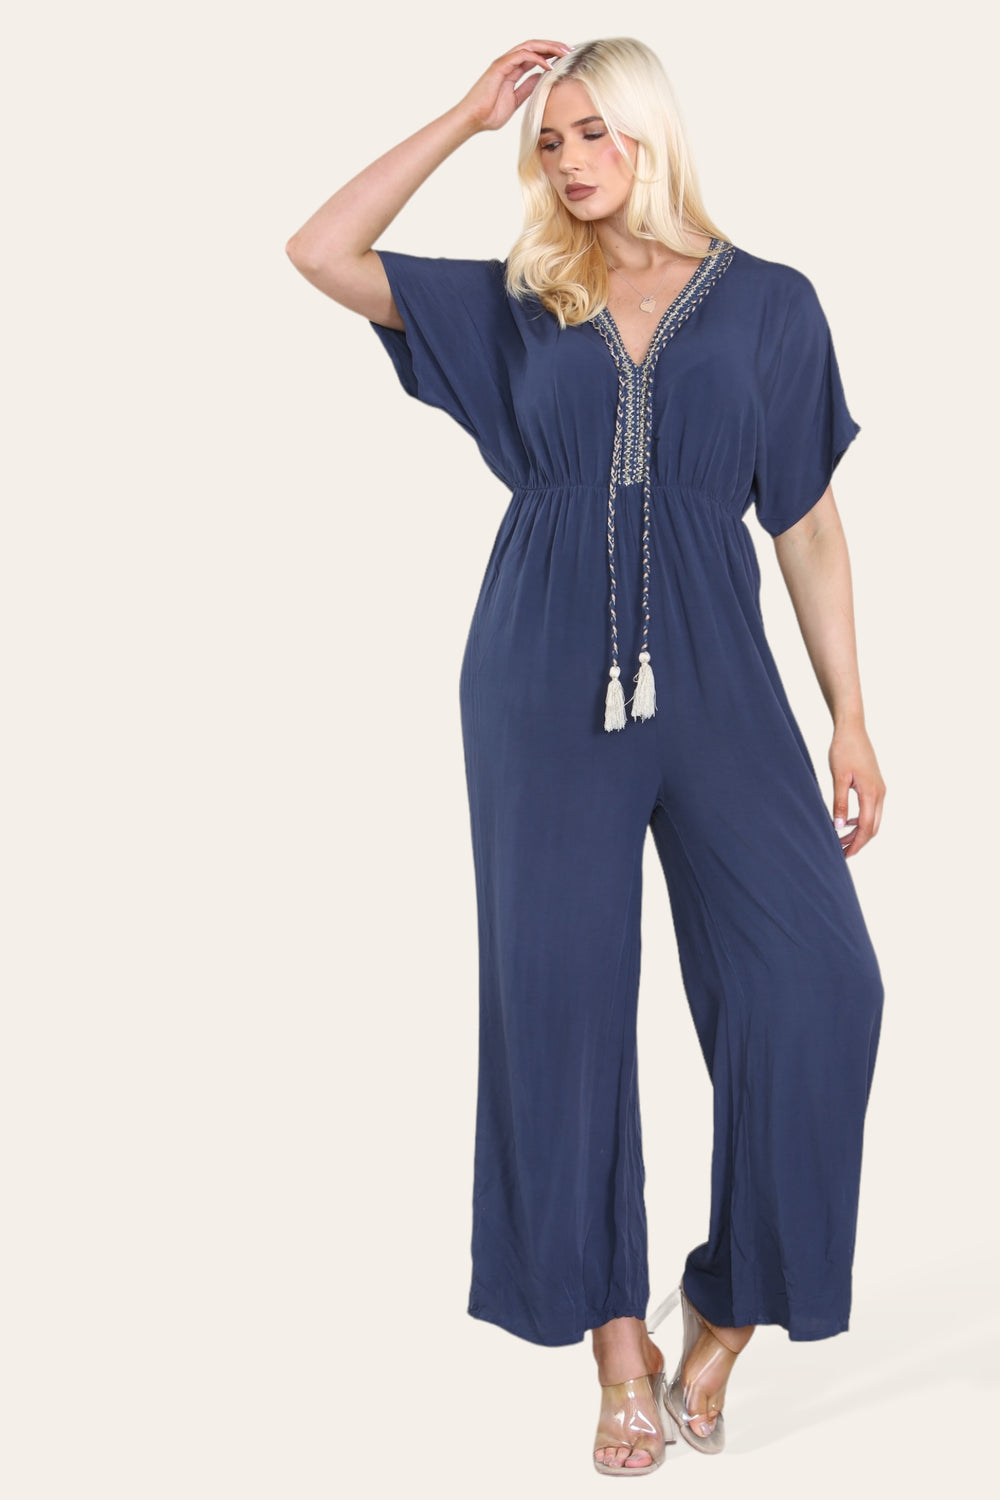 GOLD EMBROIDED TASSEL JUMPSUIT (8387758293240)